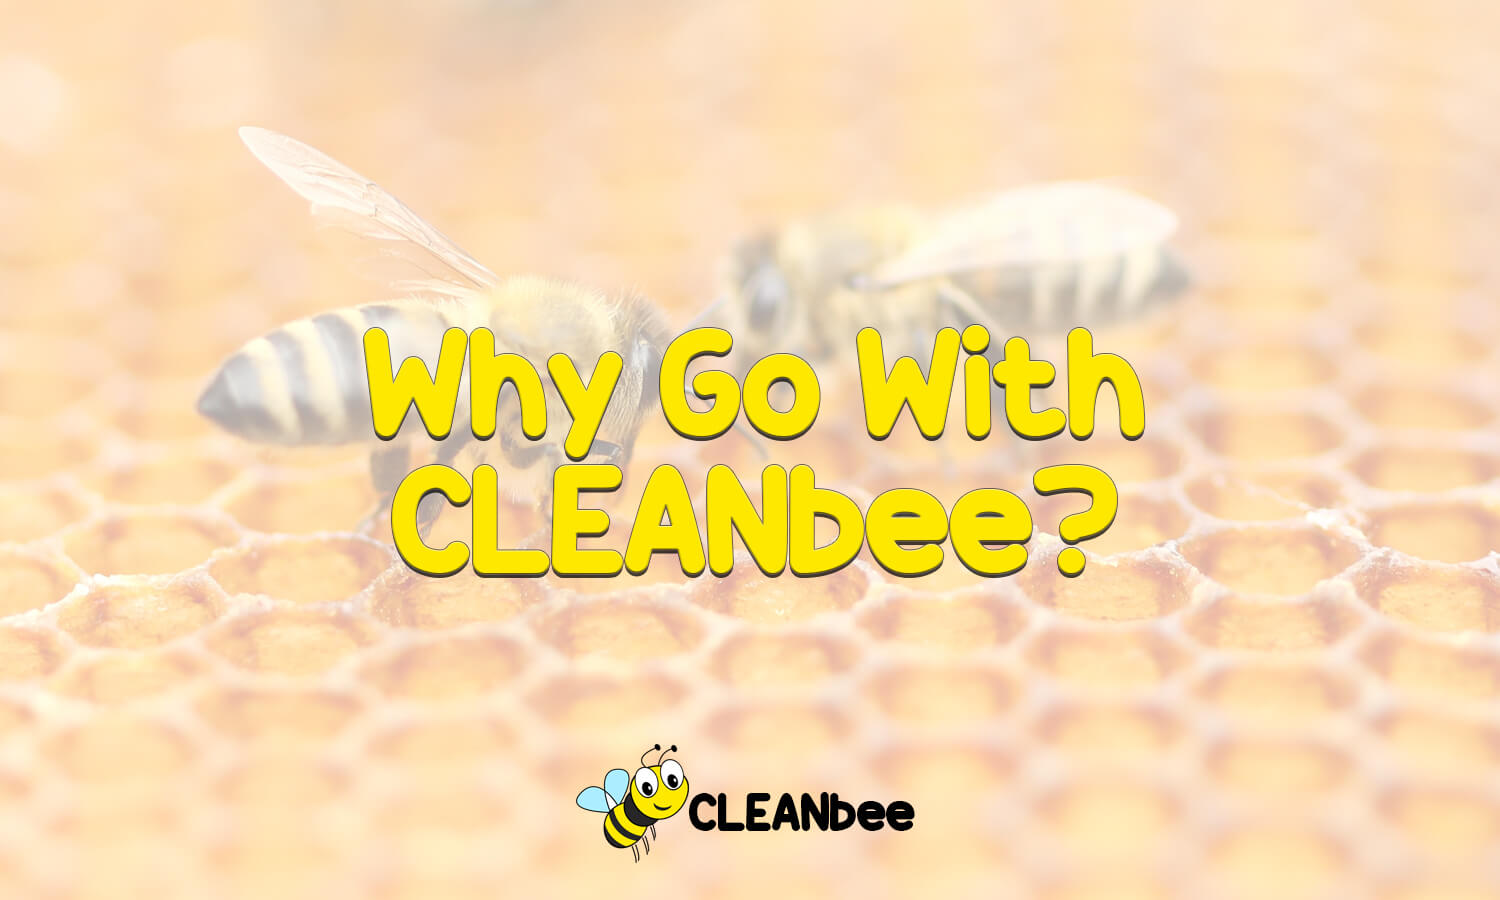 Why Go With CLEANbee?